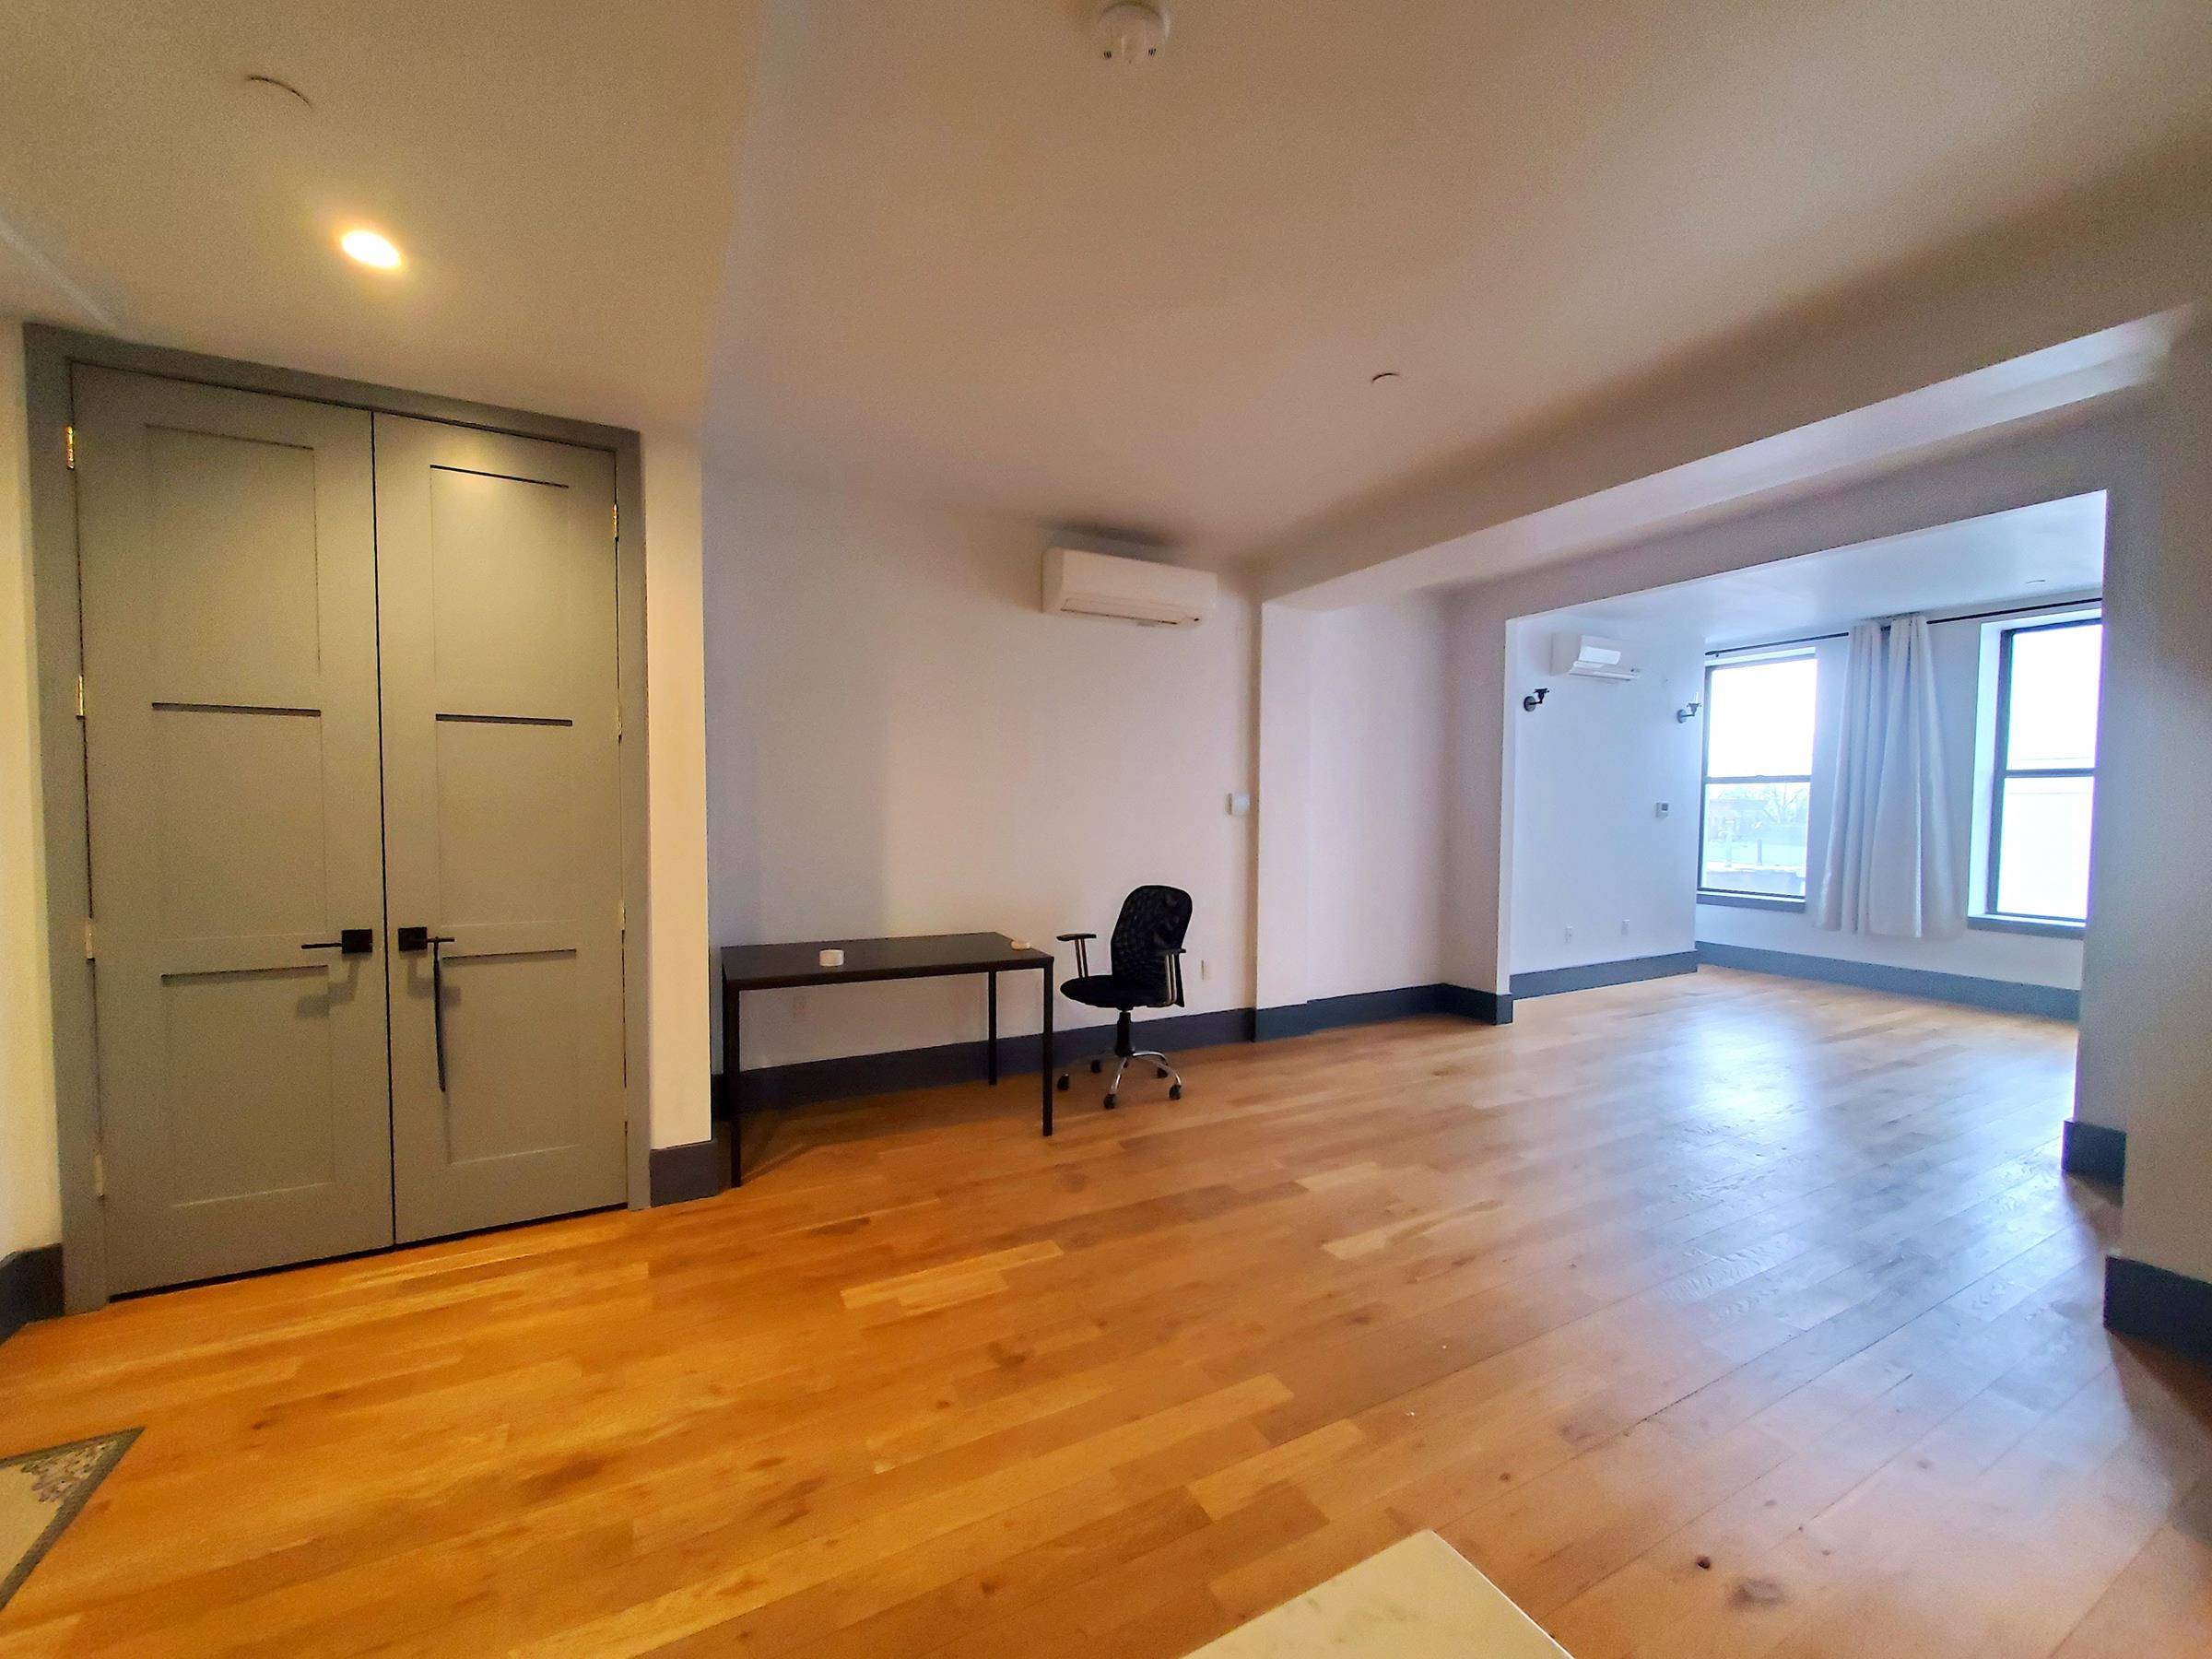 This spacious, oversized one bedroom or flexed 2 bedroom, with central air and great closet space just became available in an amenity rich, elevator laundry building.